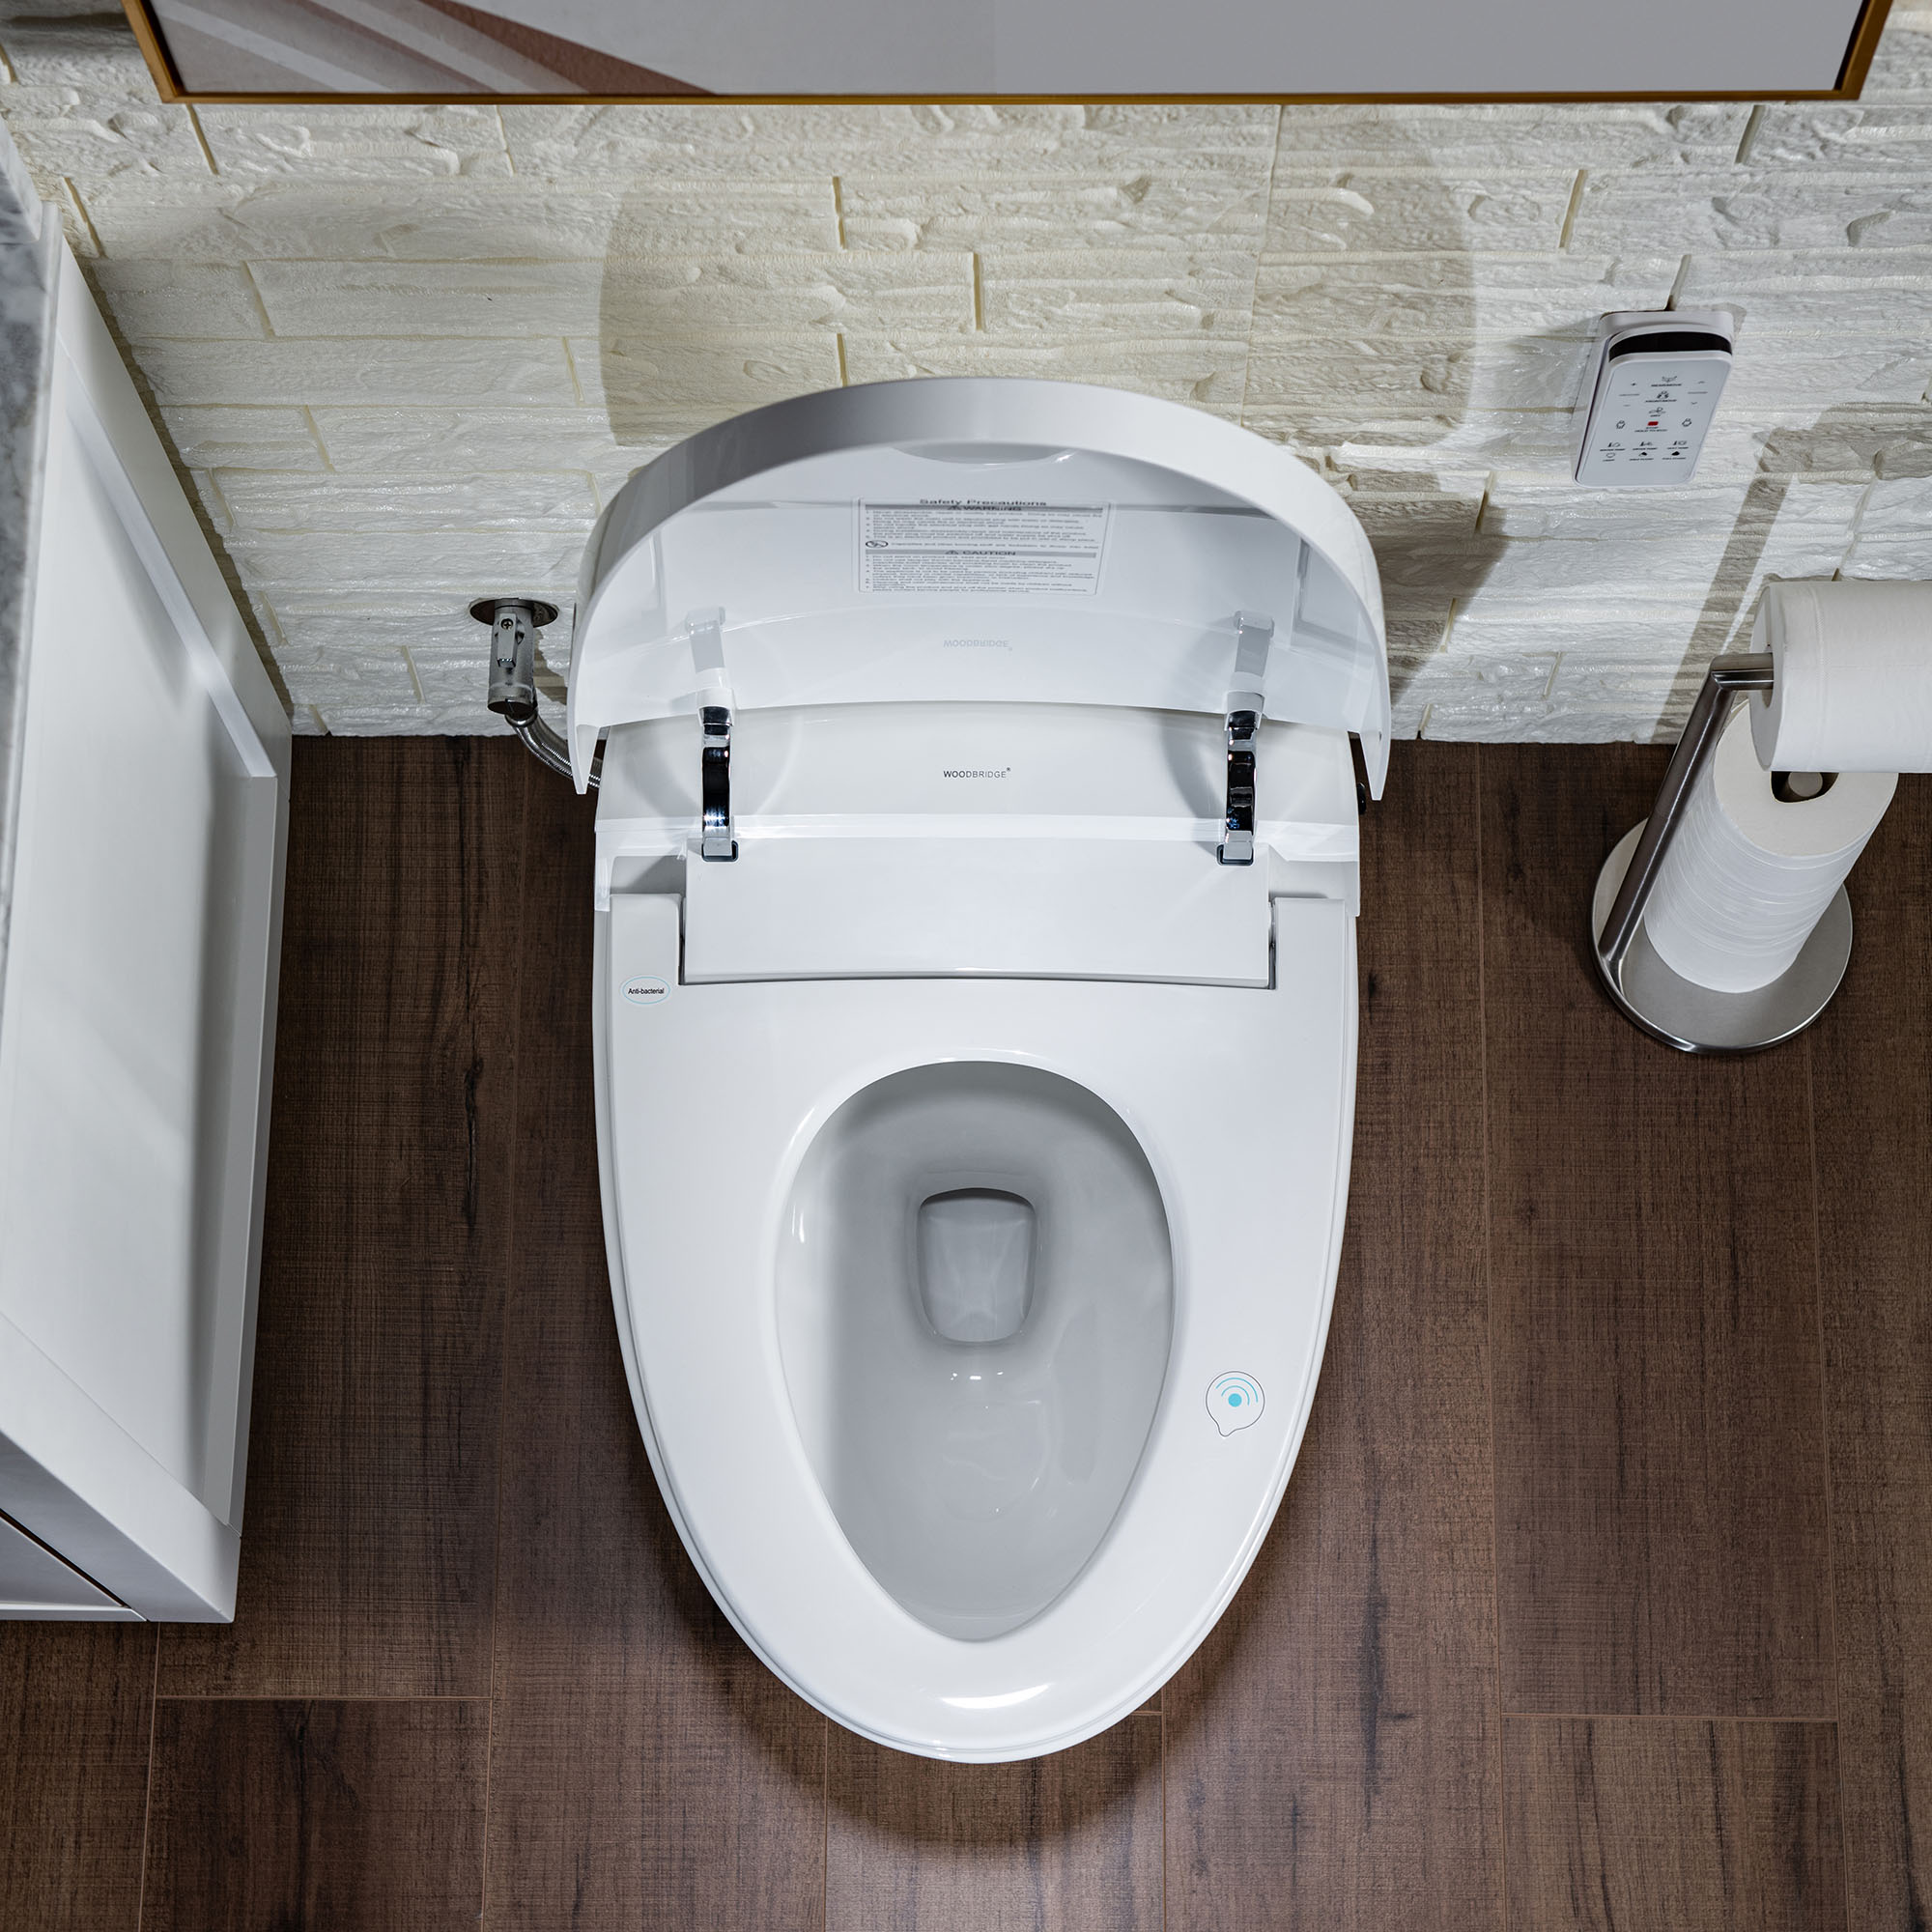  WOODBRIDGE B0970S Smart Bidet Tankless Toilet Elongated One Piece Chair Height, Auto Flush, Foot Sensor Operation, Heated Seat with Integrated Multi Function Remote Control in White_12177